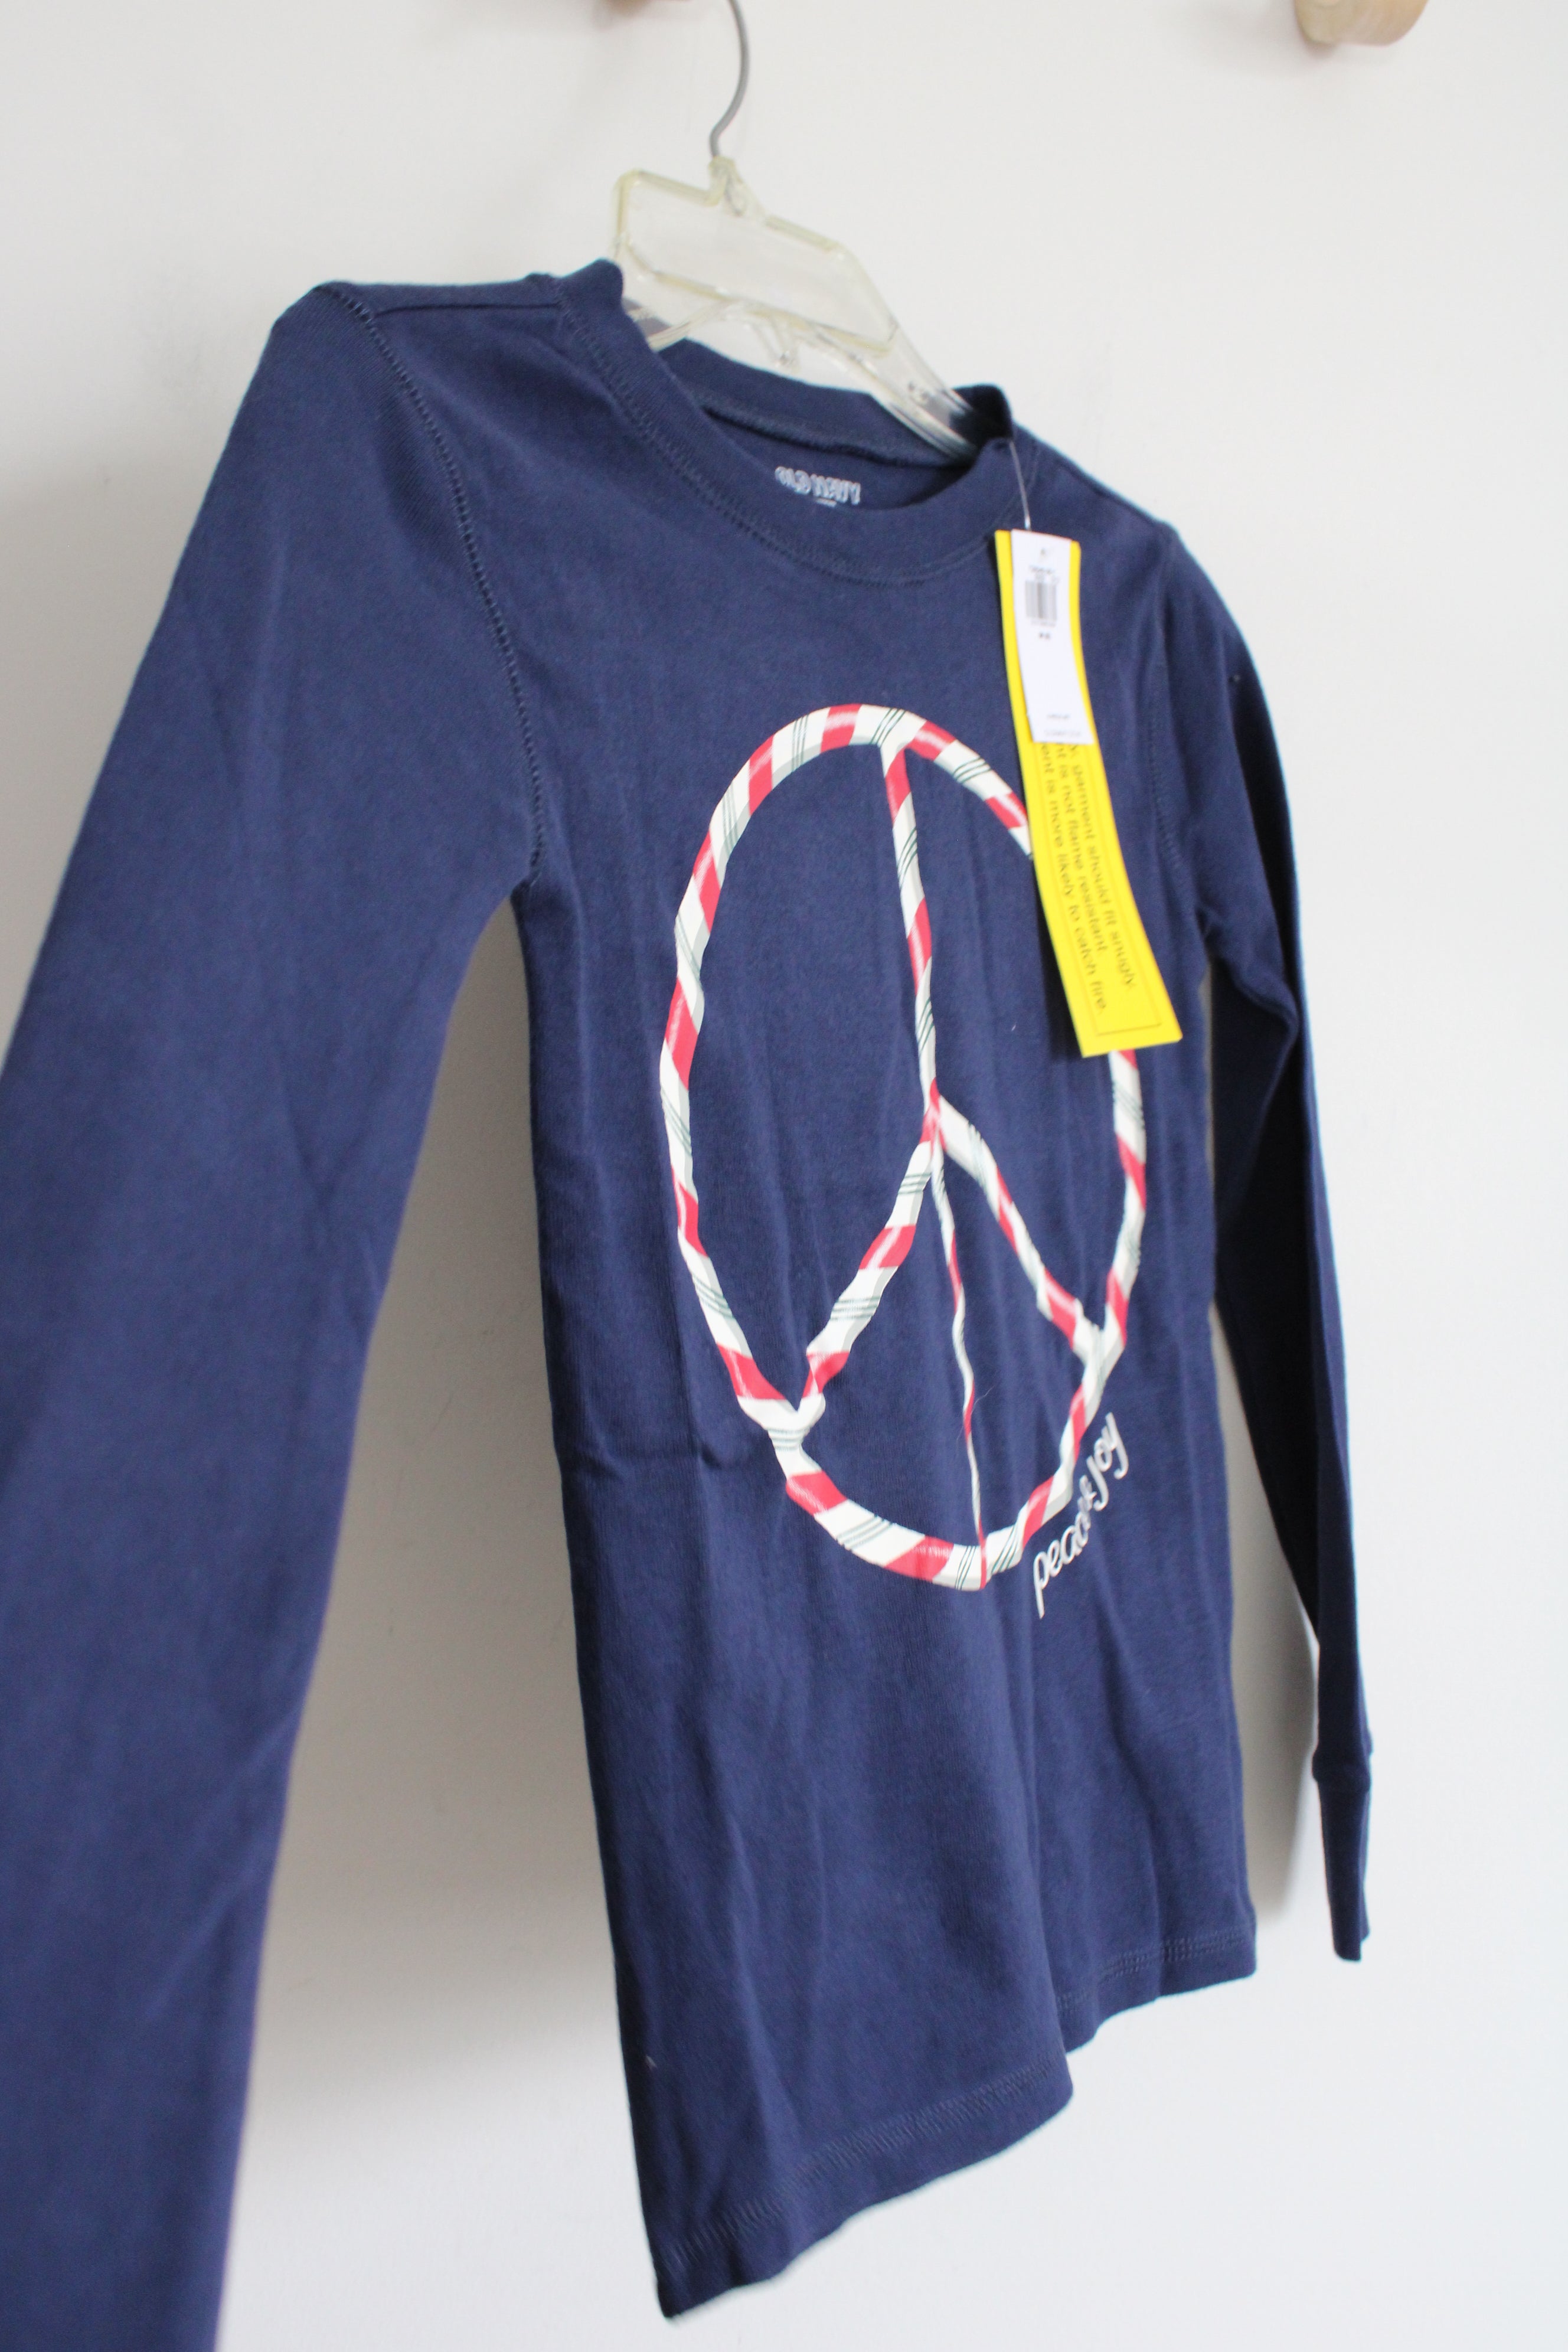 NEW Old Navy Candy Cane Peace Sign Shirt | Youth M (8)